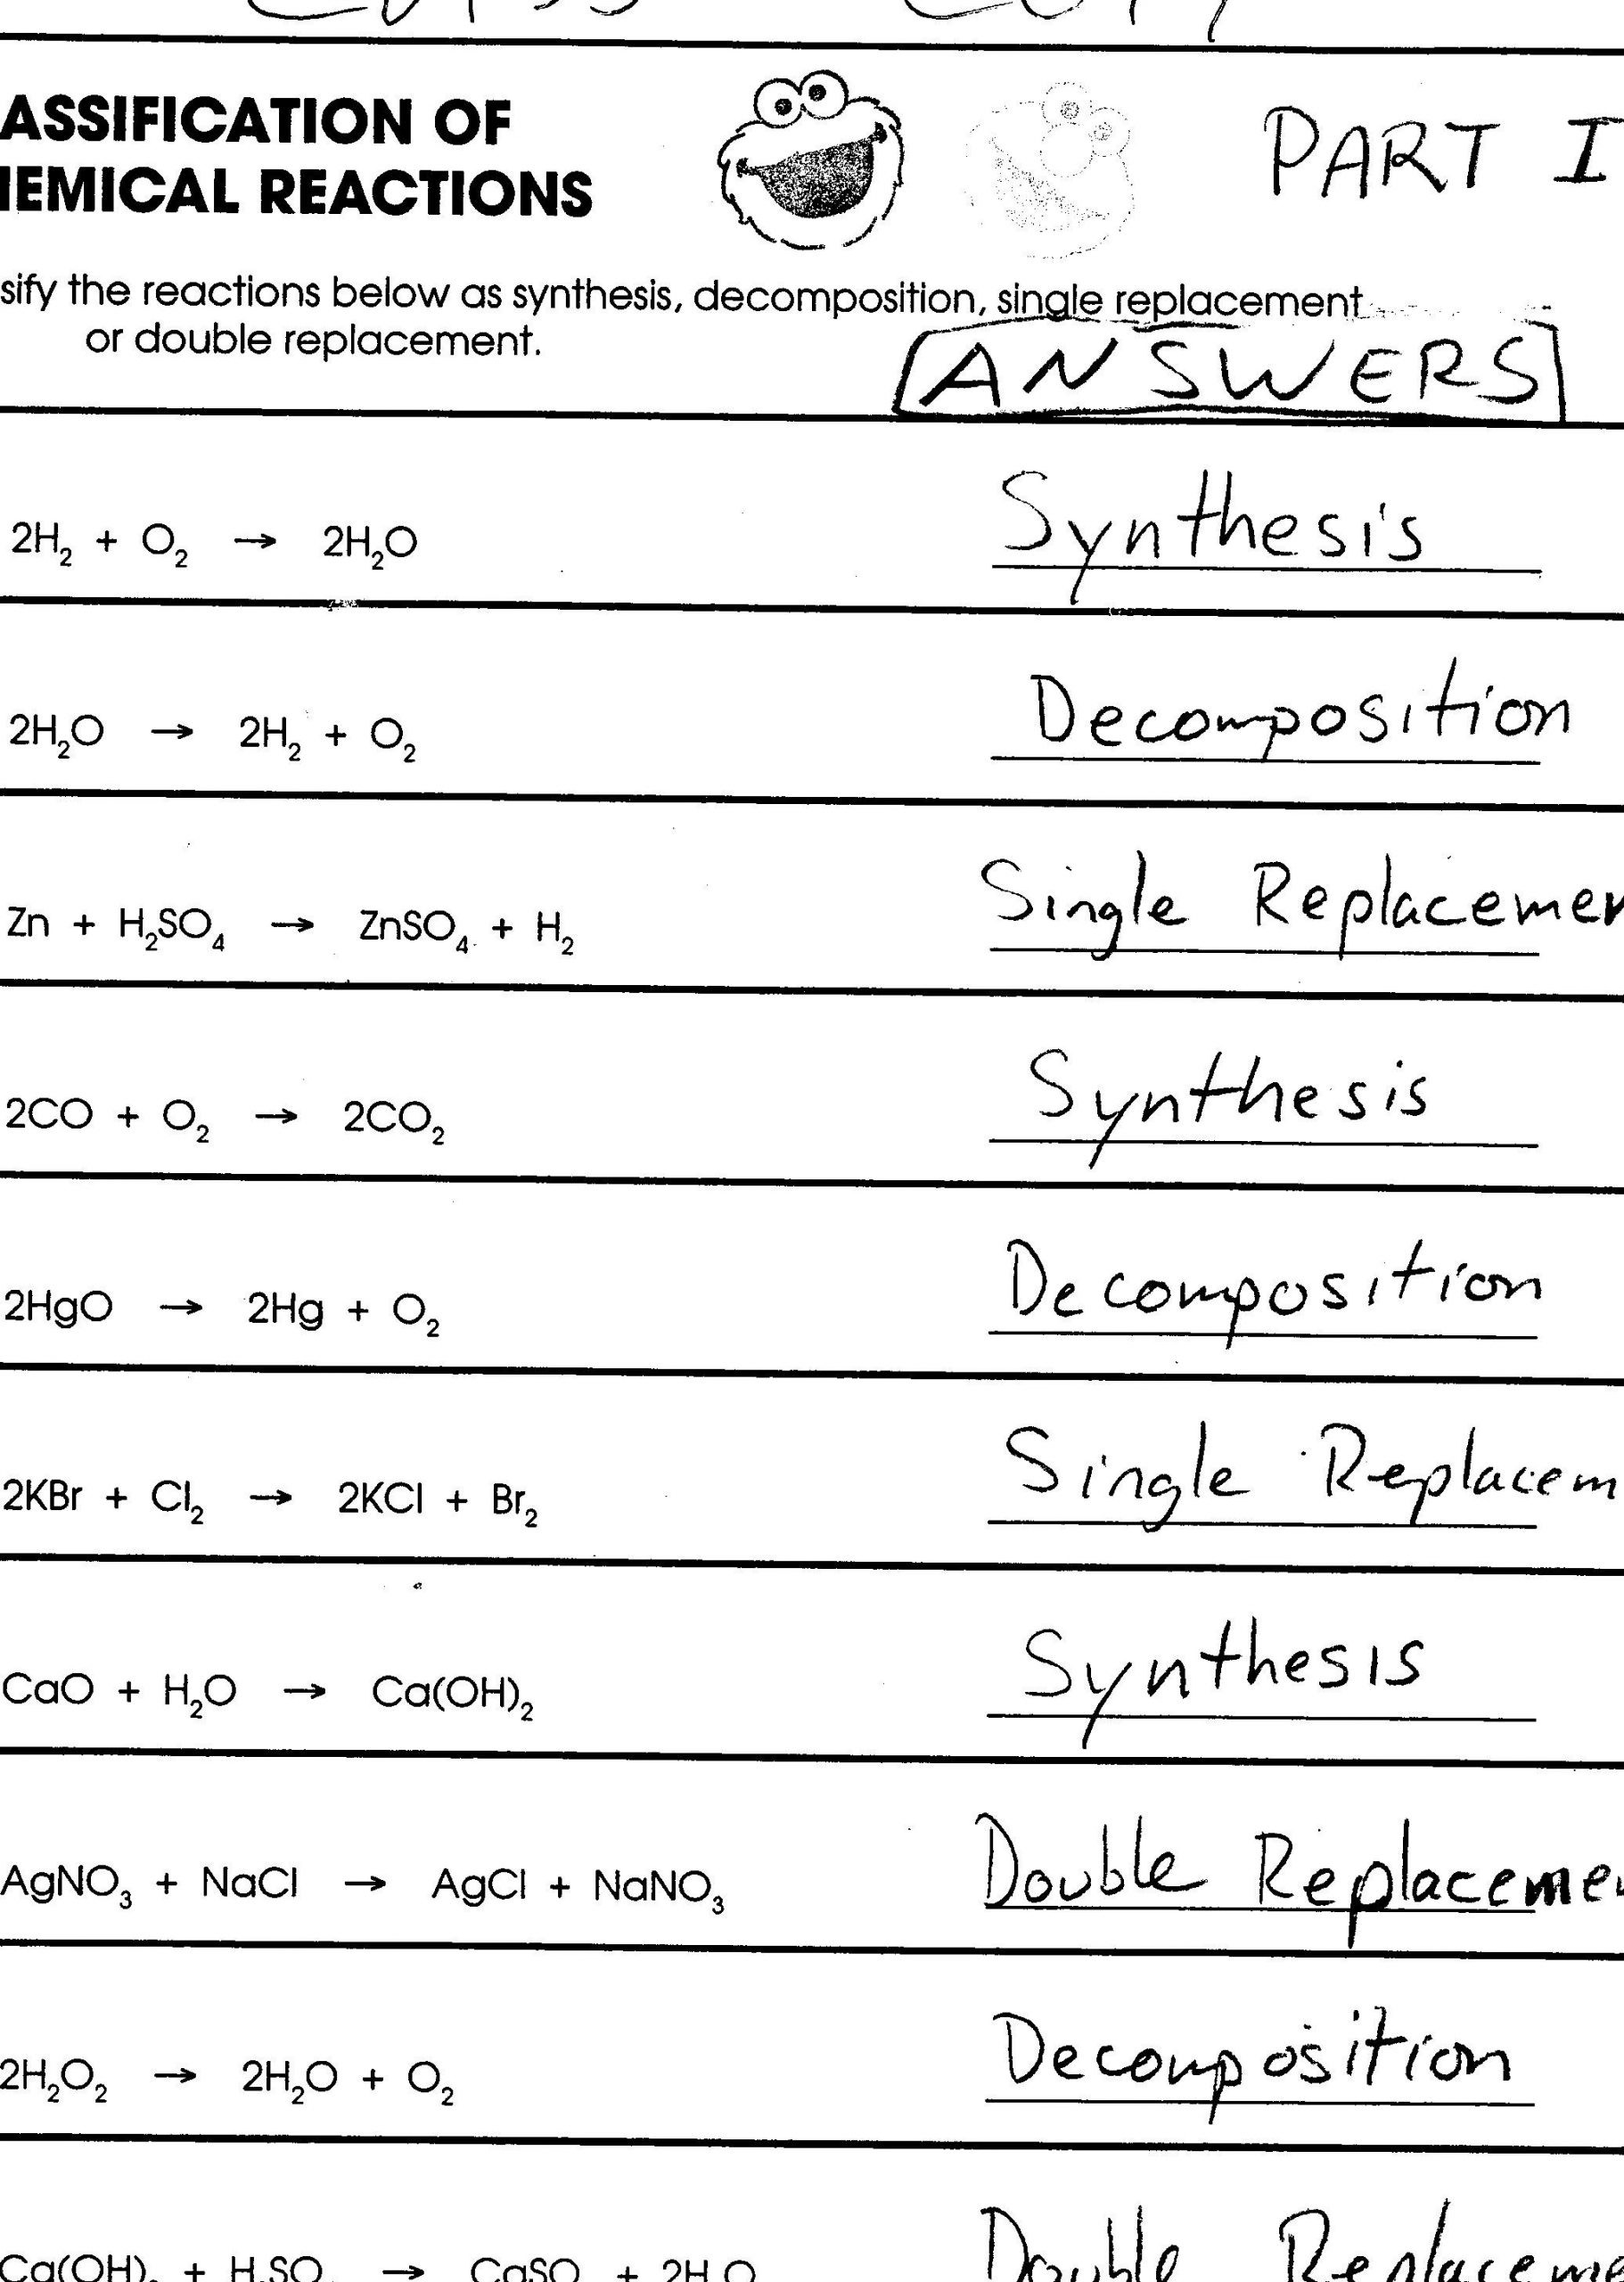 Chemical Reaction Type Worksheet 10 Classifying Chemical Reactions Worksheet Answers